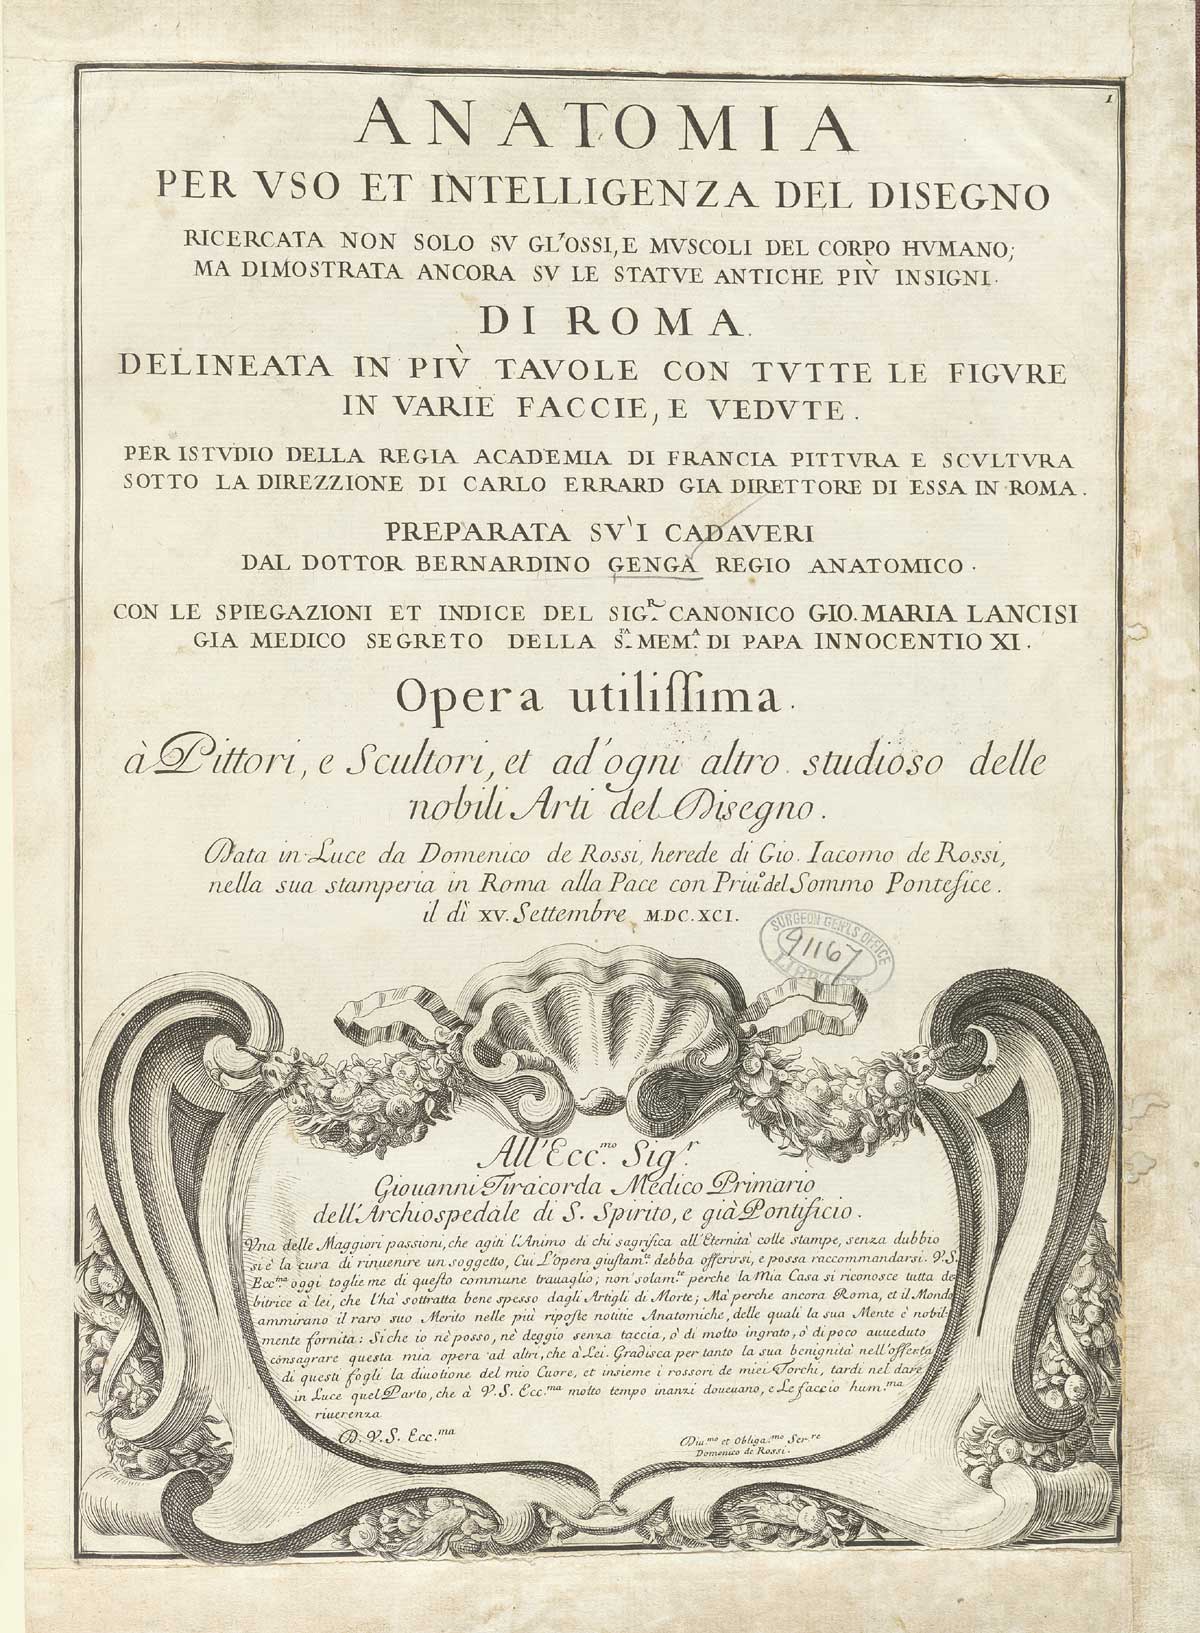 Engraved title page for Bernardino Genga’s Anatomia per uso et intelligenza del disegno, with a floriated frame at the bottom containing the dedication statement; NLM Call no.: WZ 250 G329an 1691.